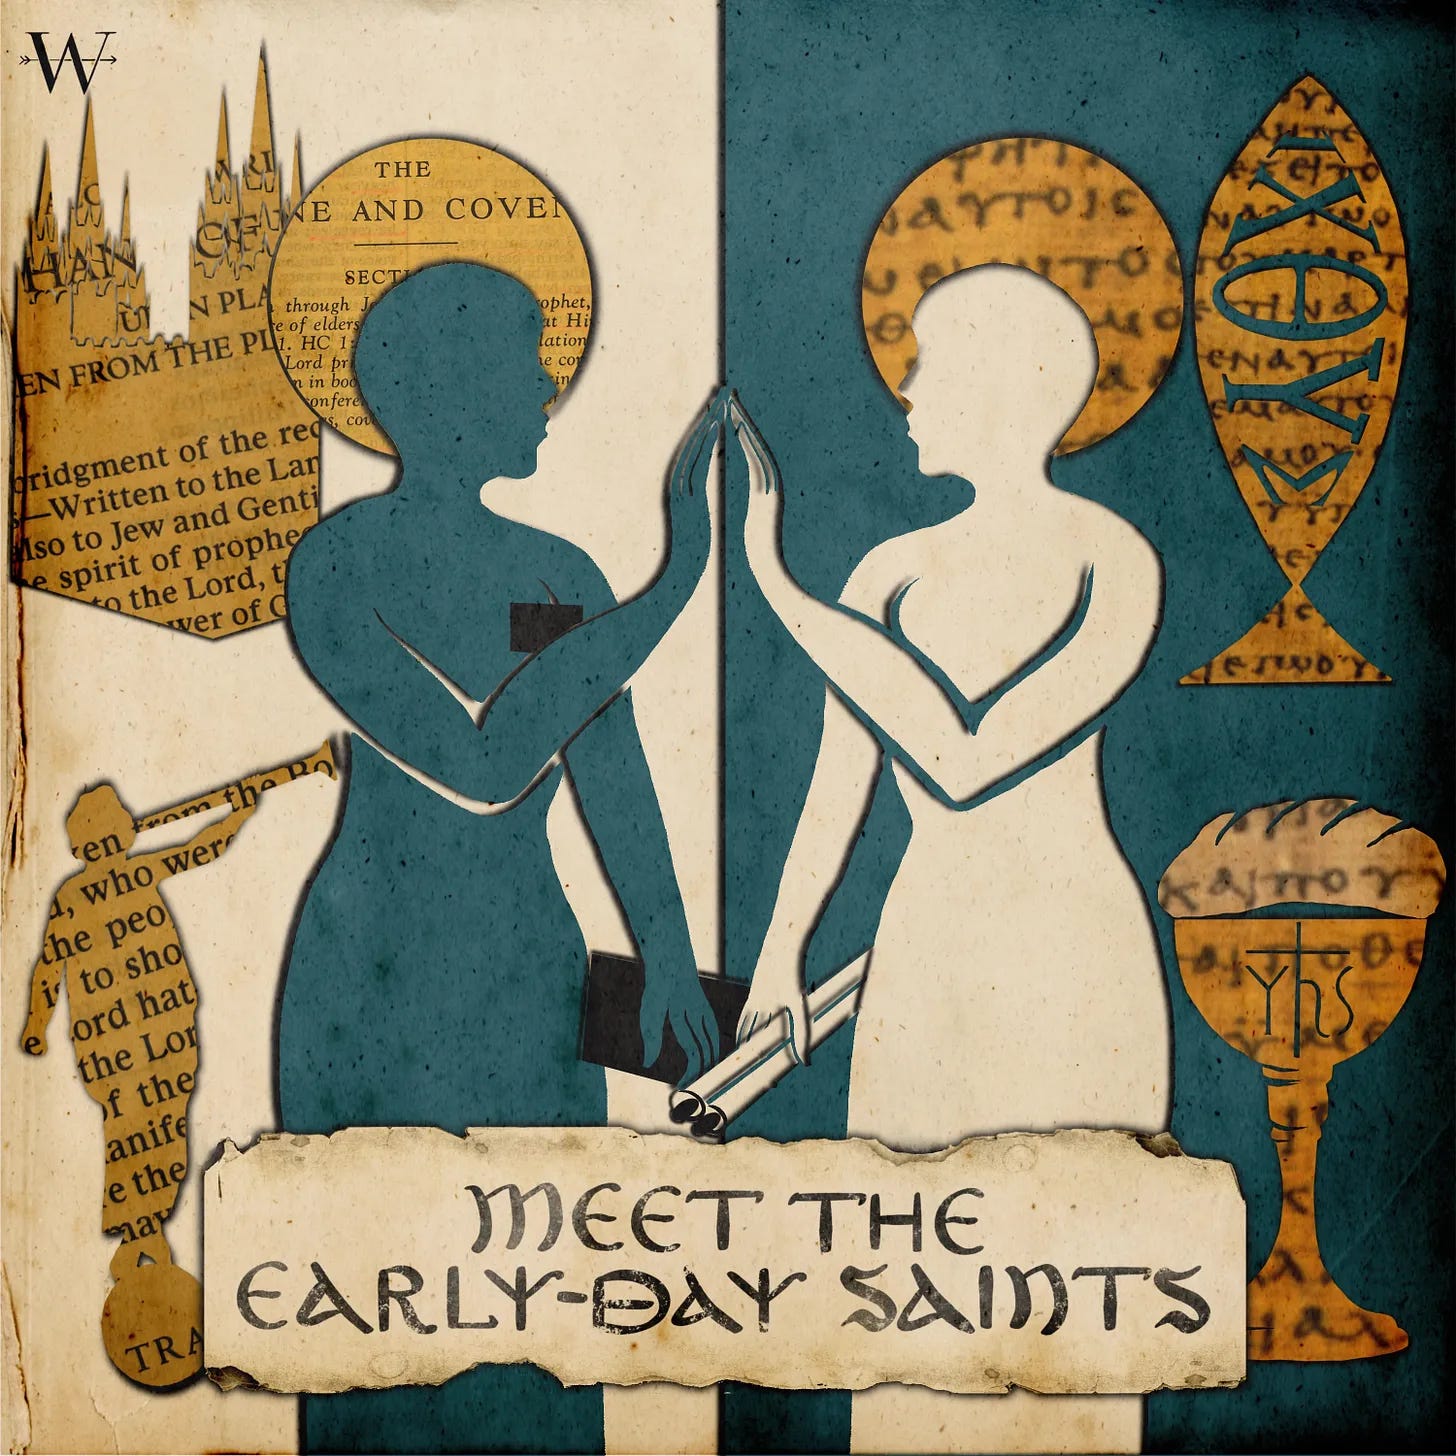 Meet the Early-day Saints Episode 2: Preaching, with Kristian Heal